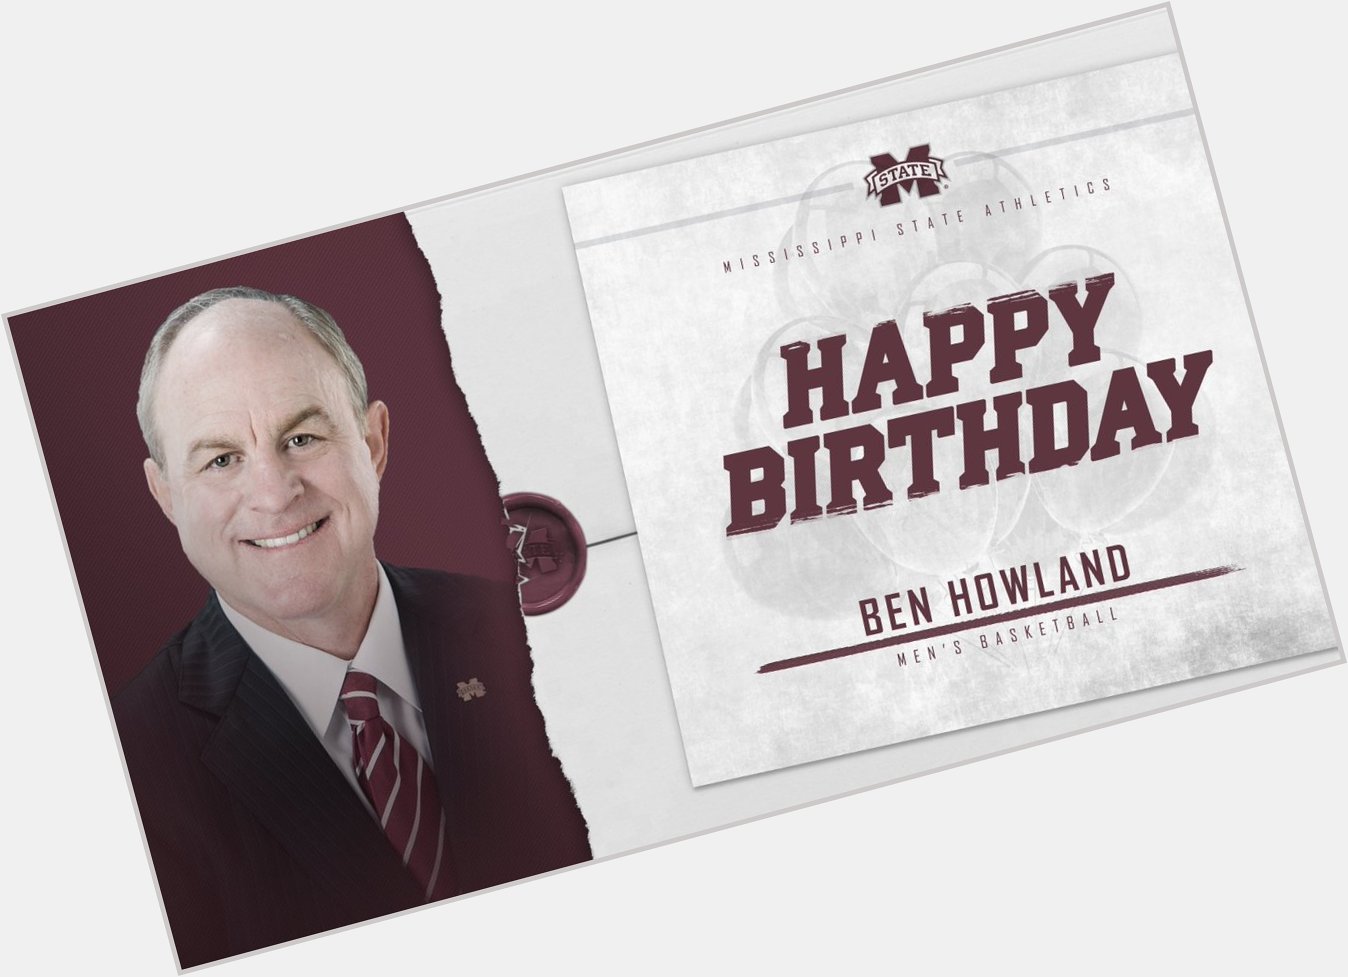  Join us in wishing a happy birthday to our head coach   